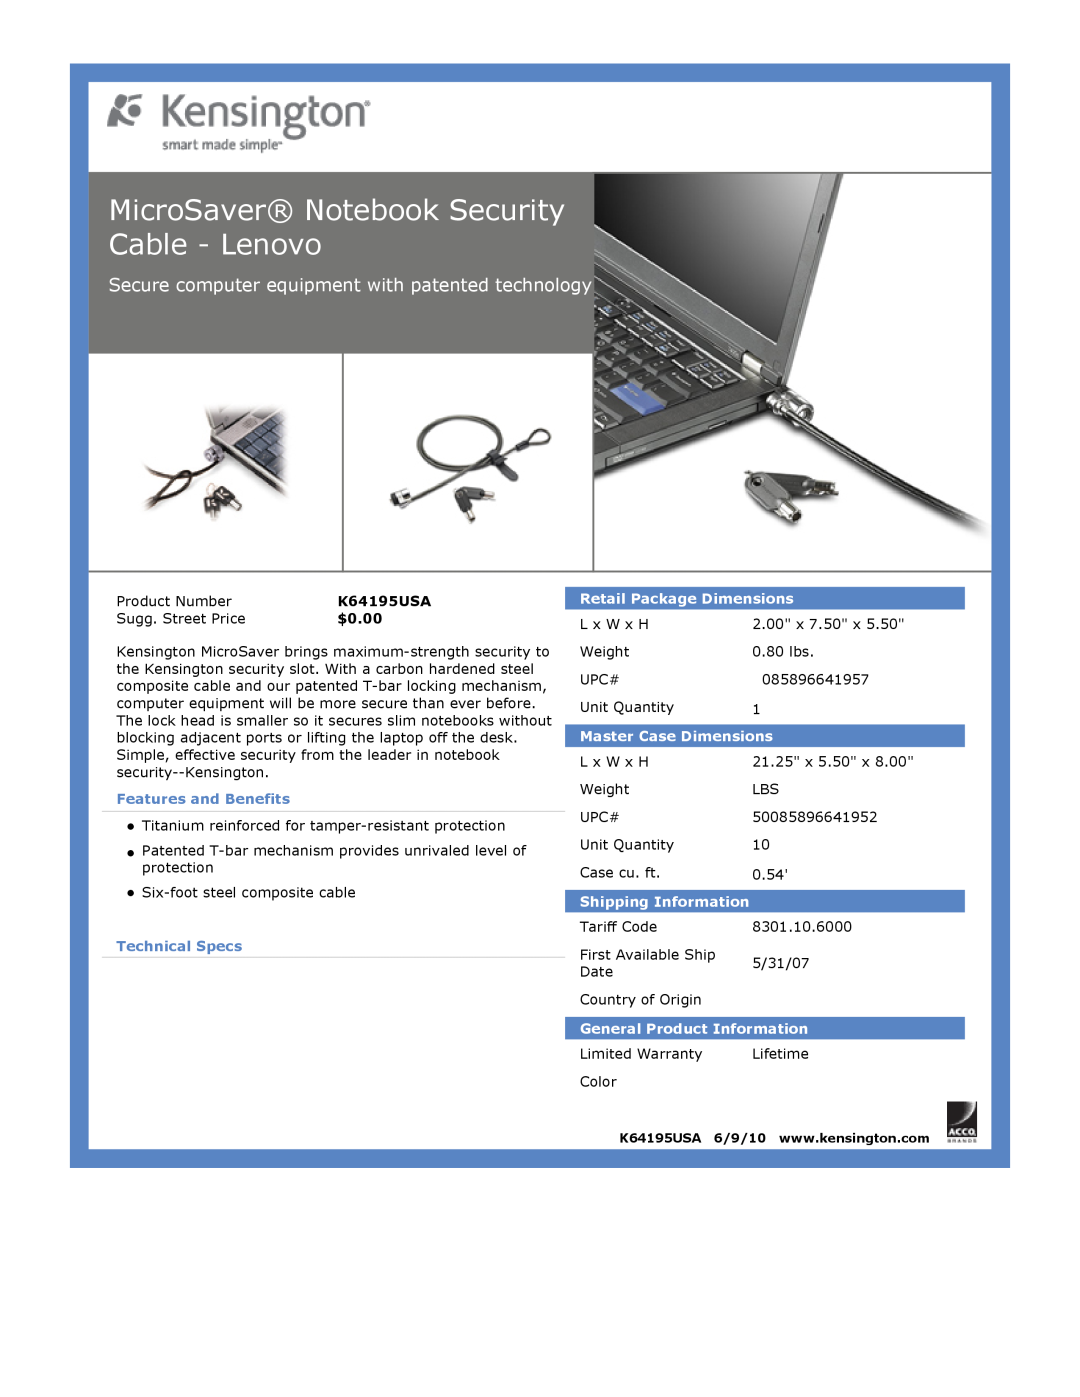 Kensington EU64325 dimensions MicroSaver Notebook Security Cable - Lenovo, $0.00, Features and Benefits, Technical Specs 